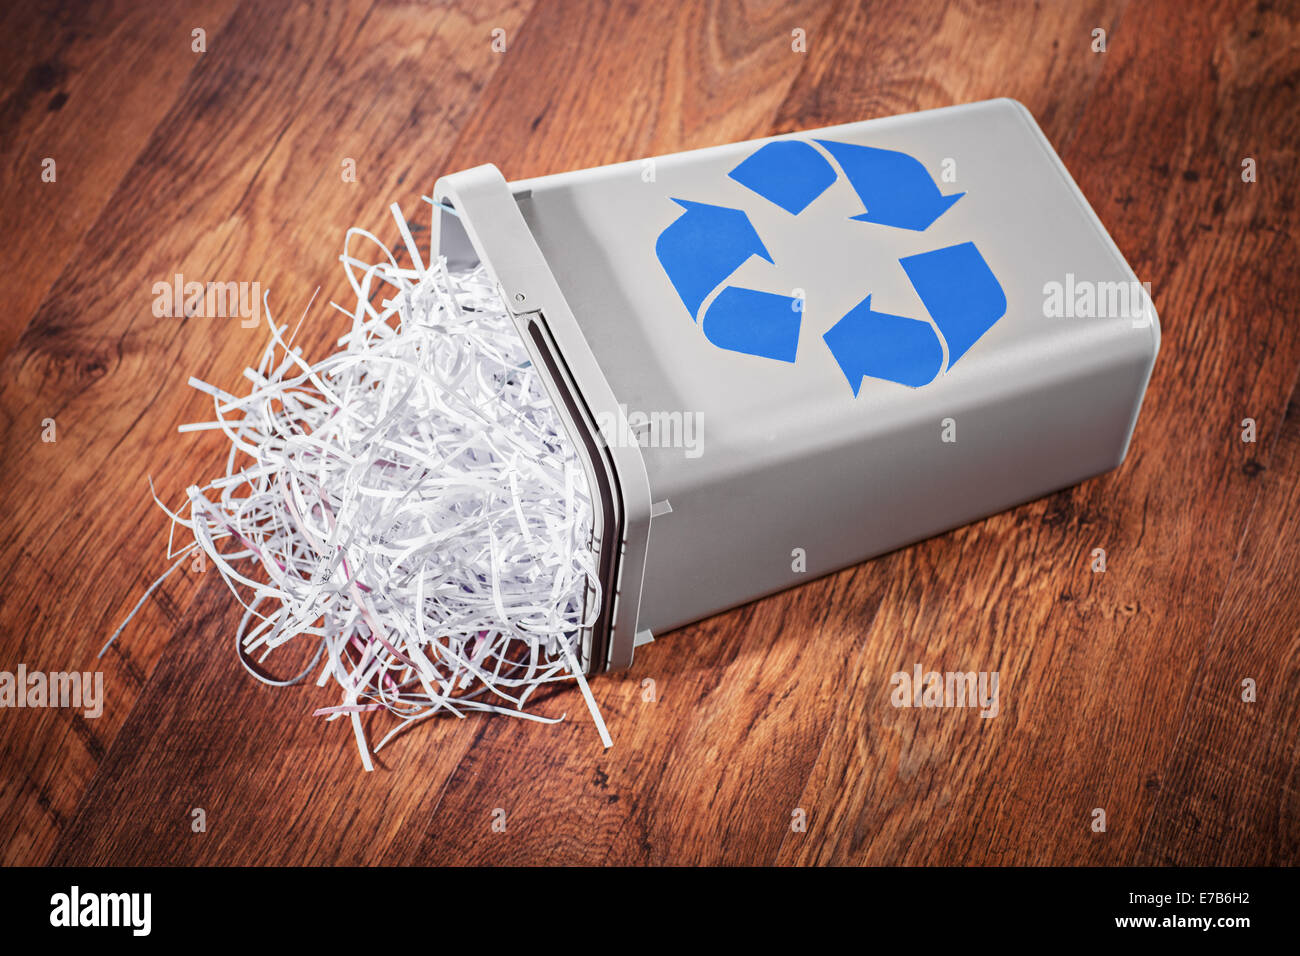 Flipped recycle bin full of shredded paper on a wooden floor Stock Photo -  Alamy